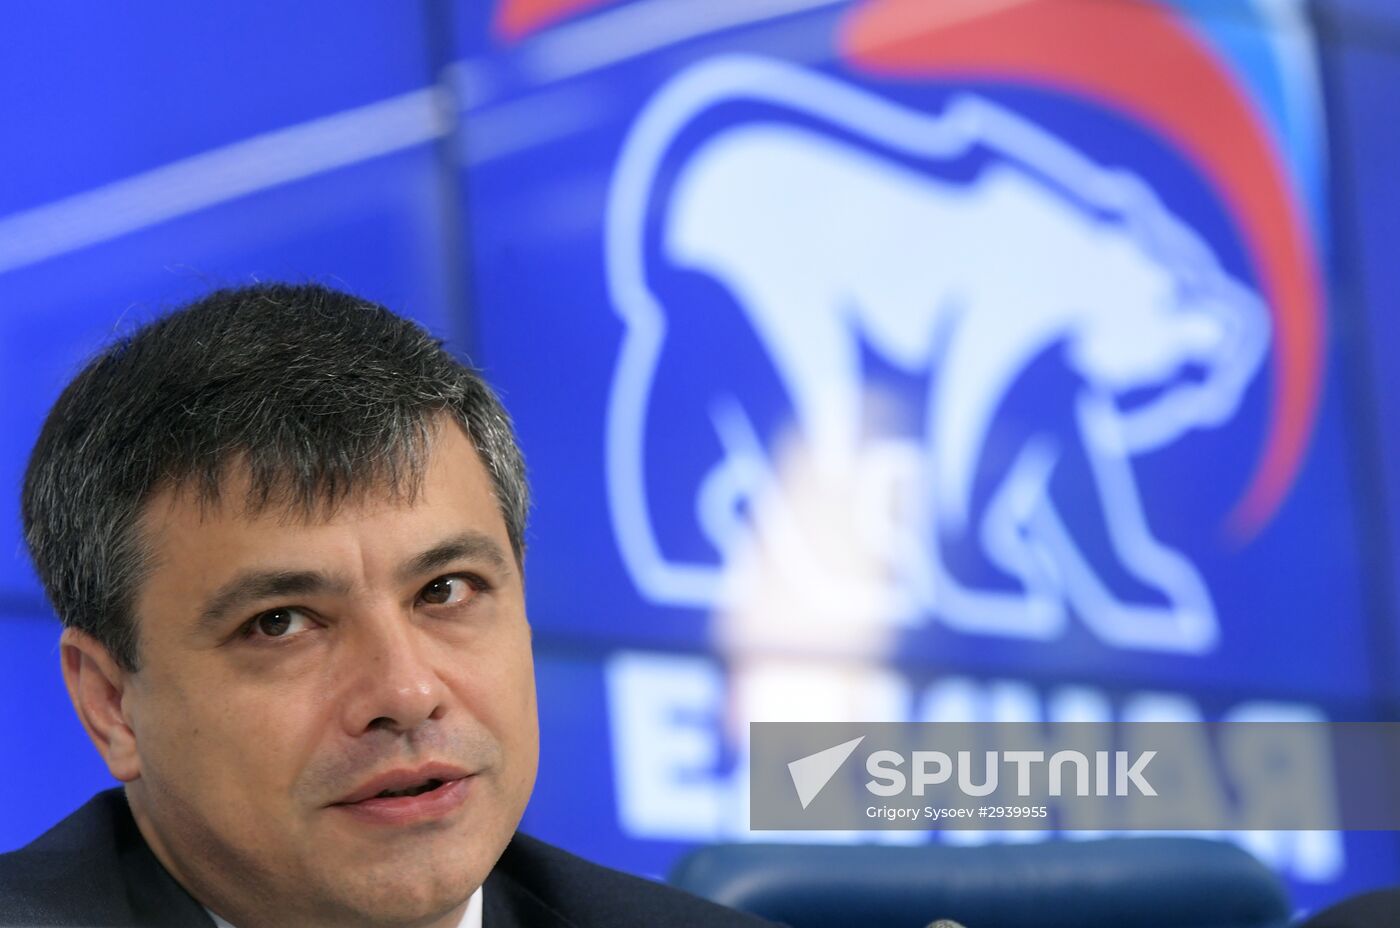 News conference by United Russia party's leaders